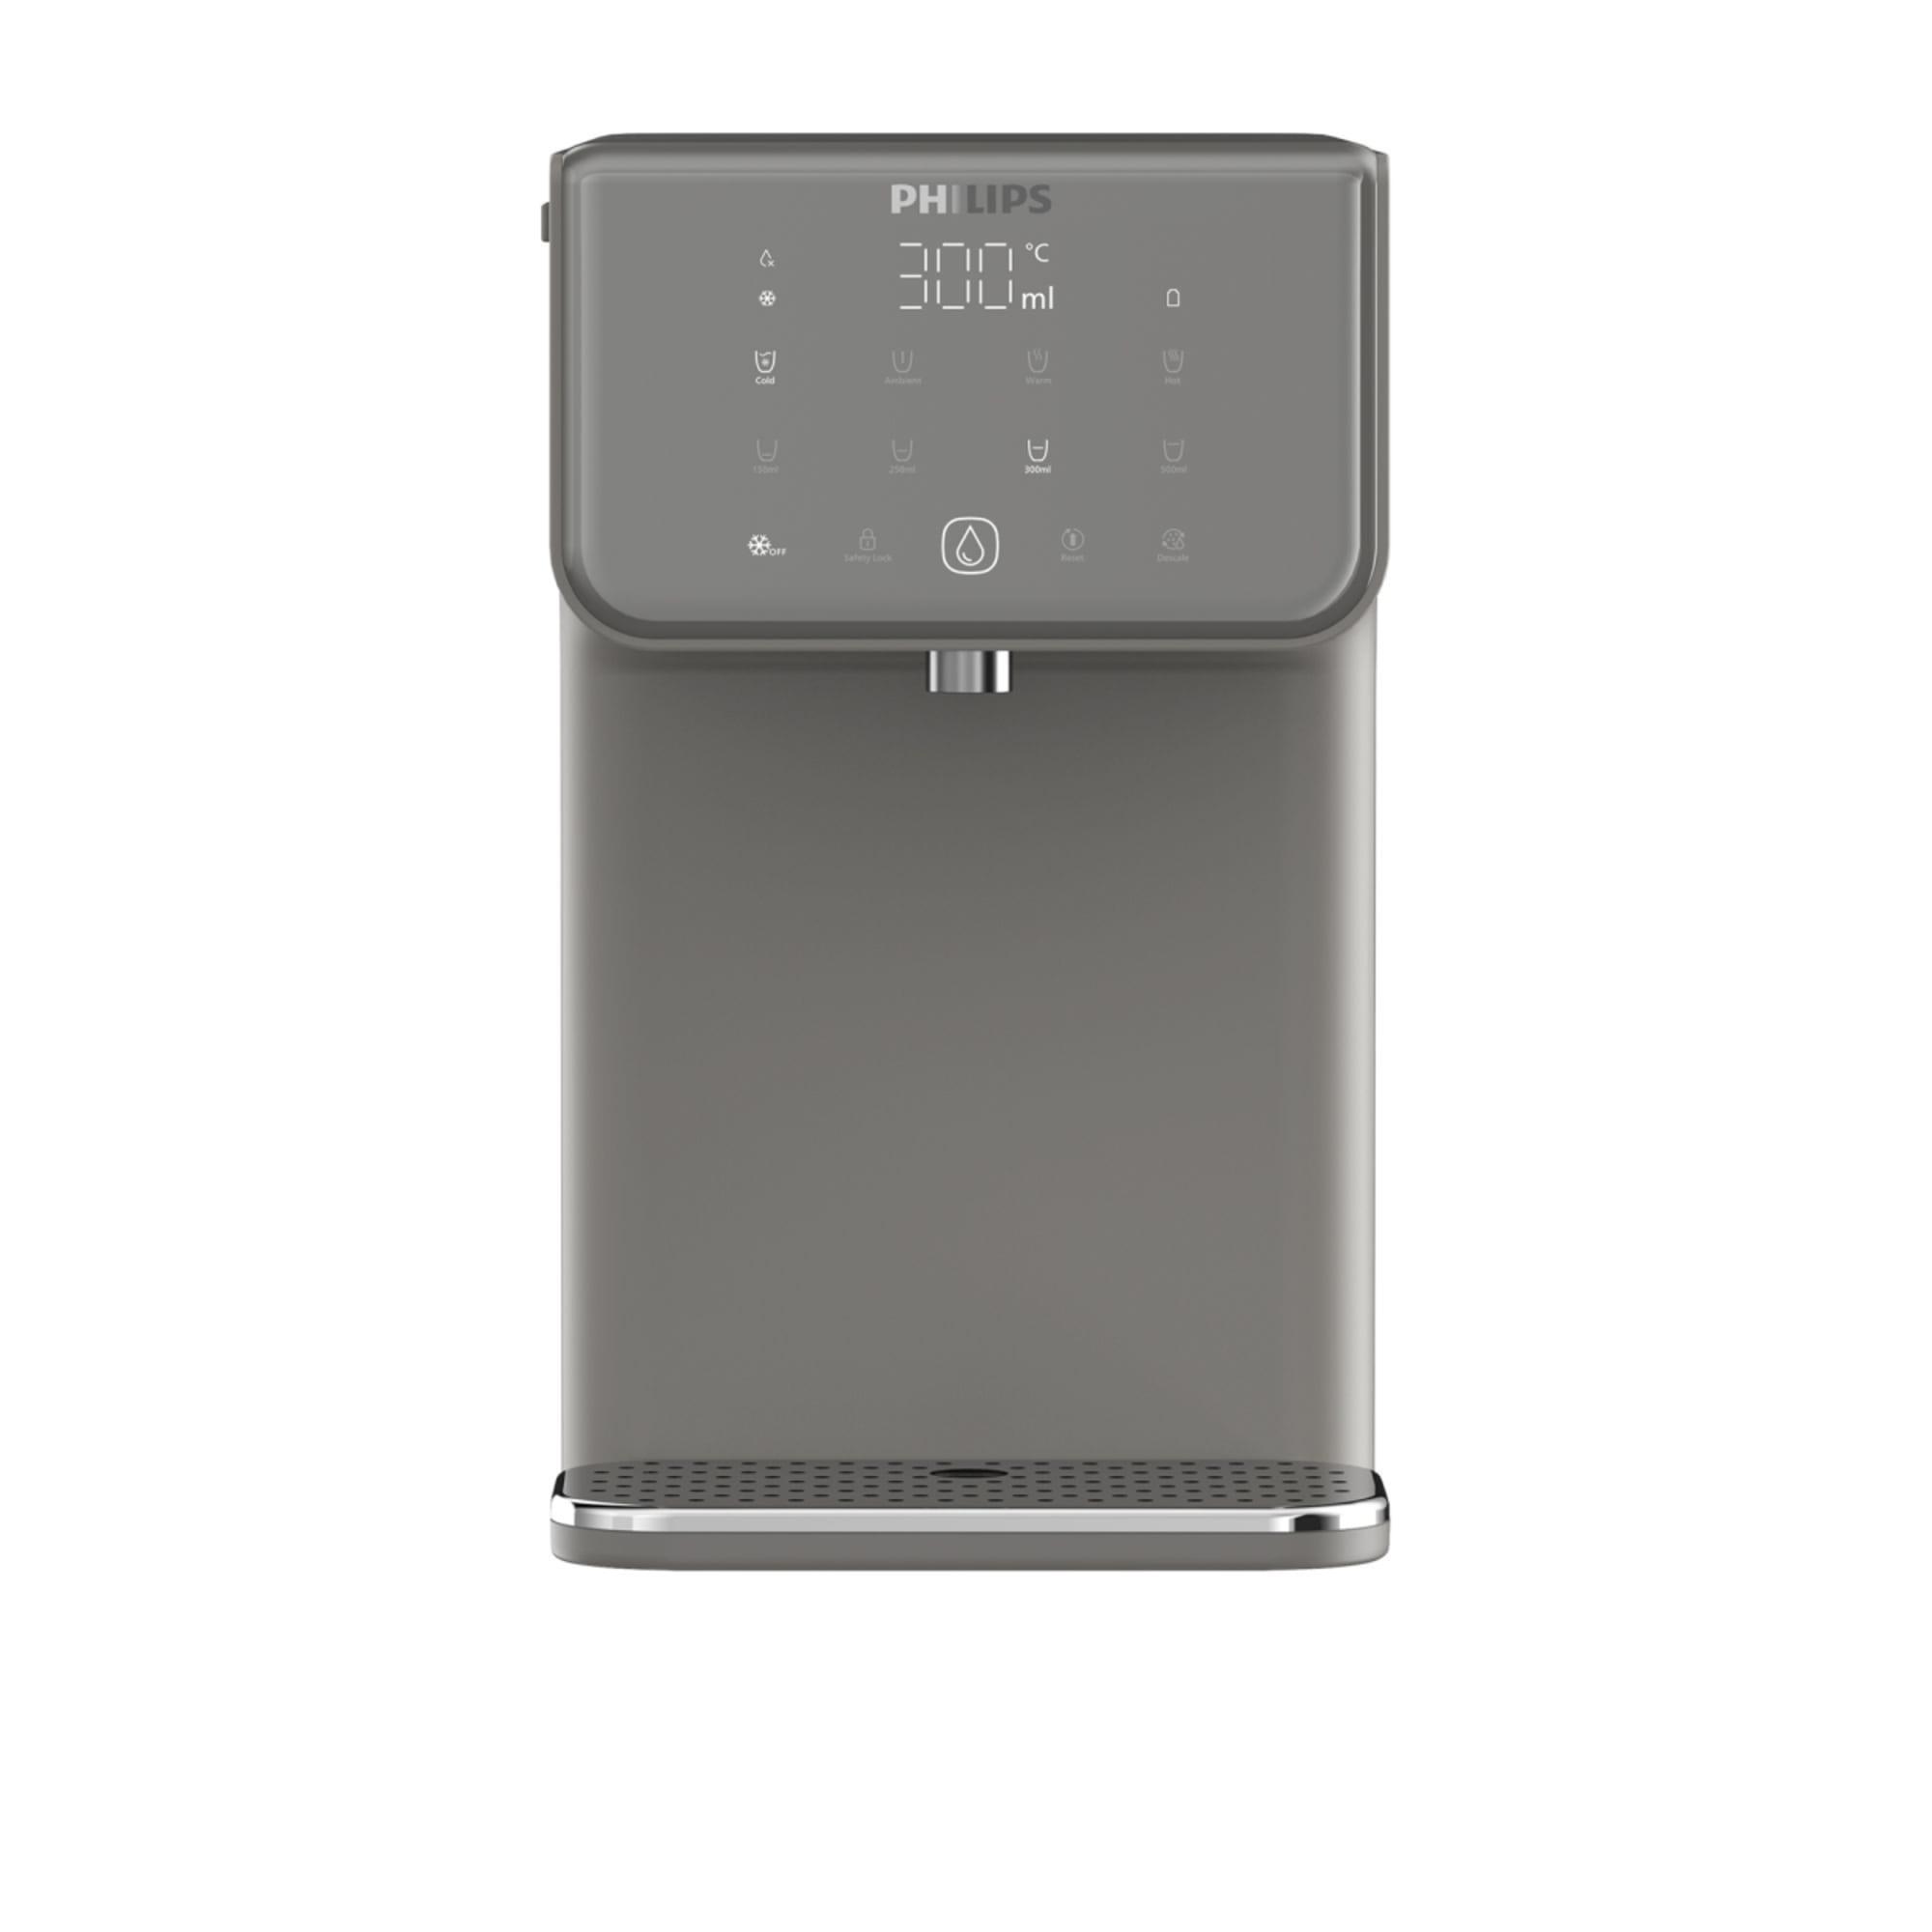 Philips Hot and Cold Compact Water Station with Micro X Clean Filtration 2.8L Image 6